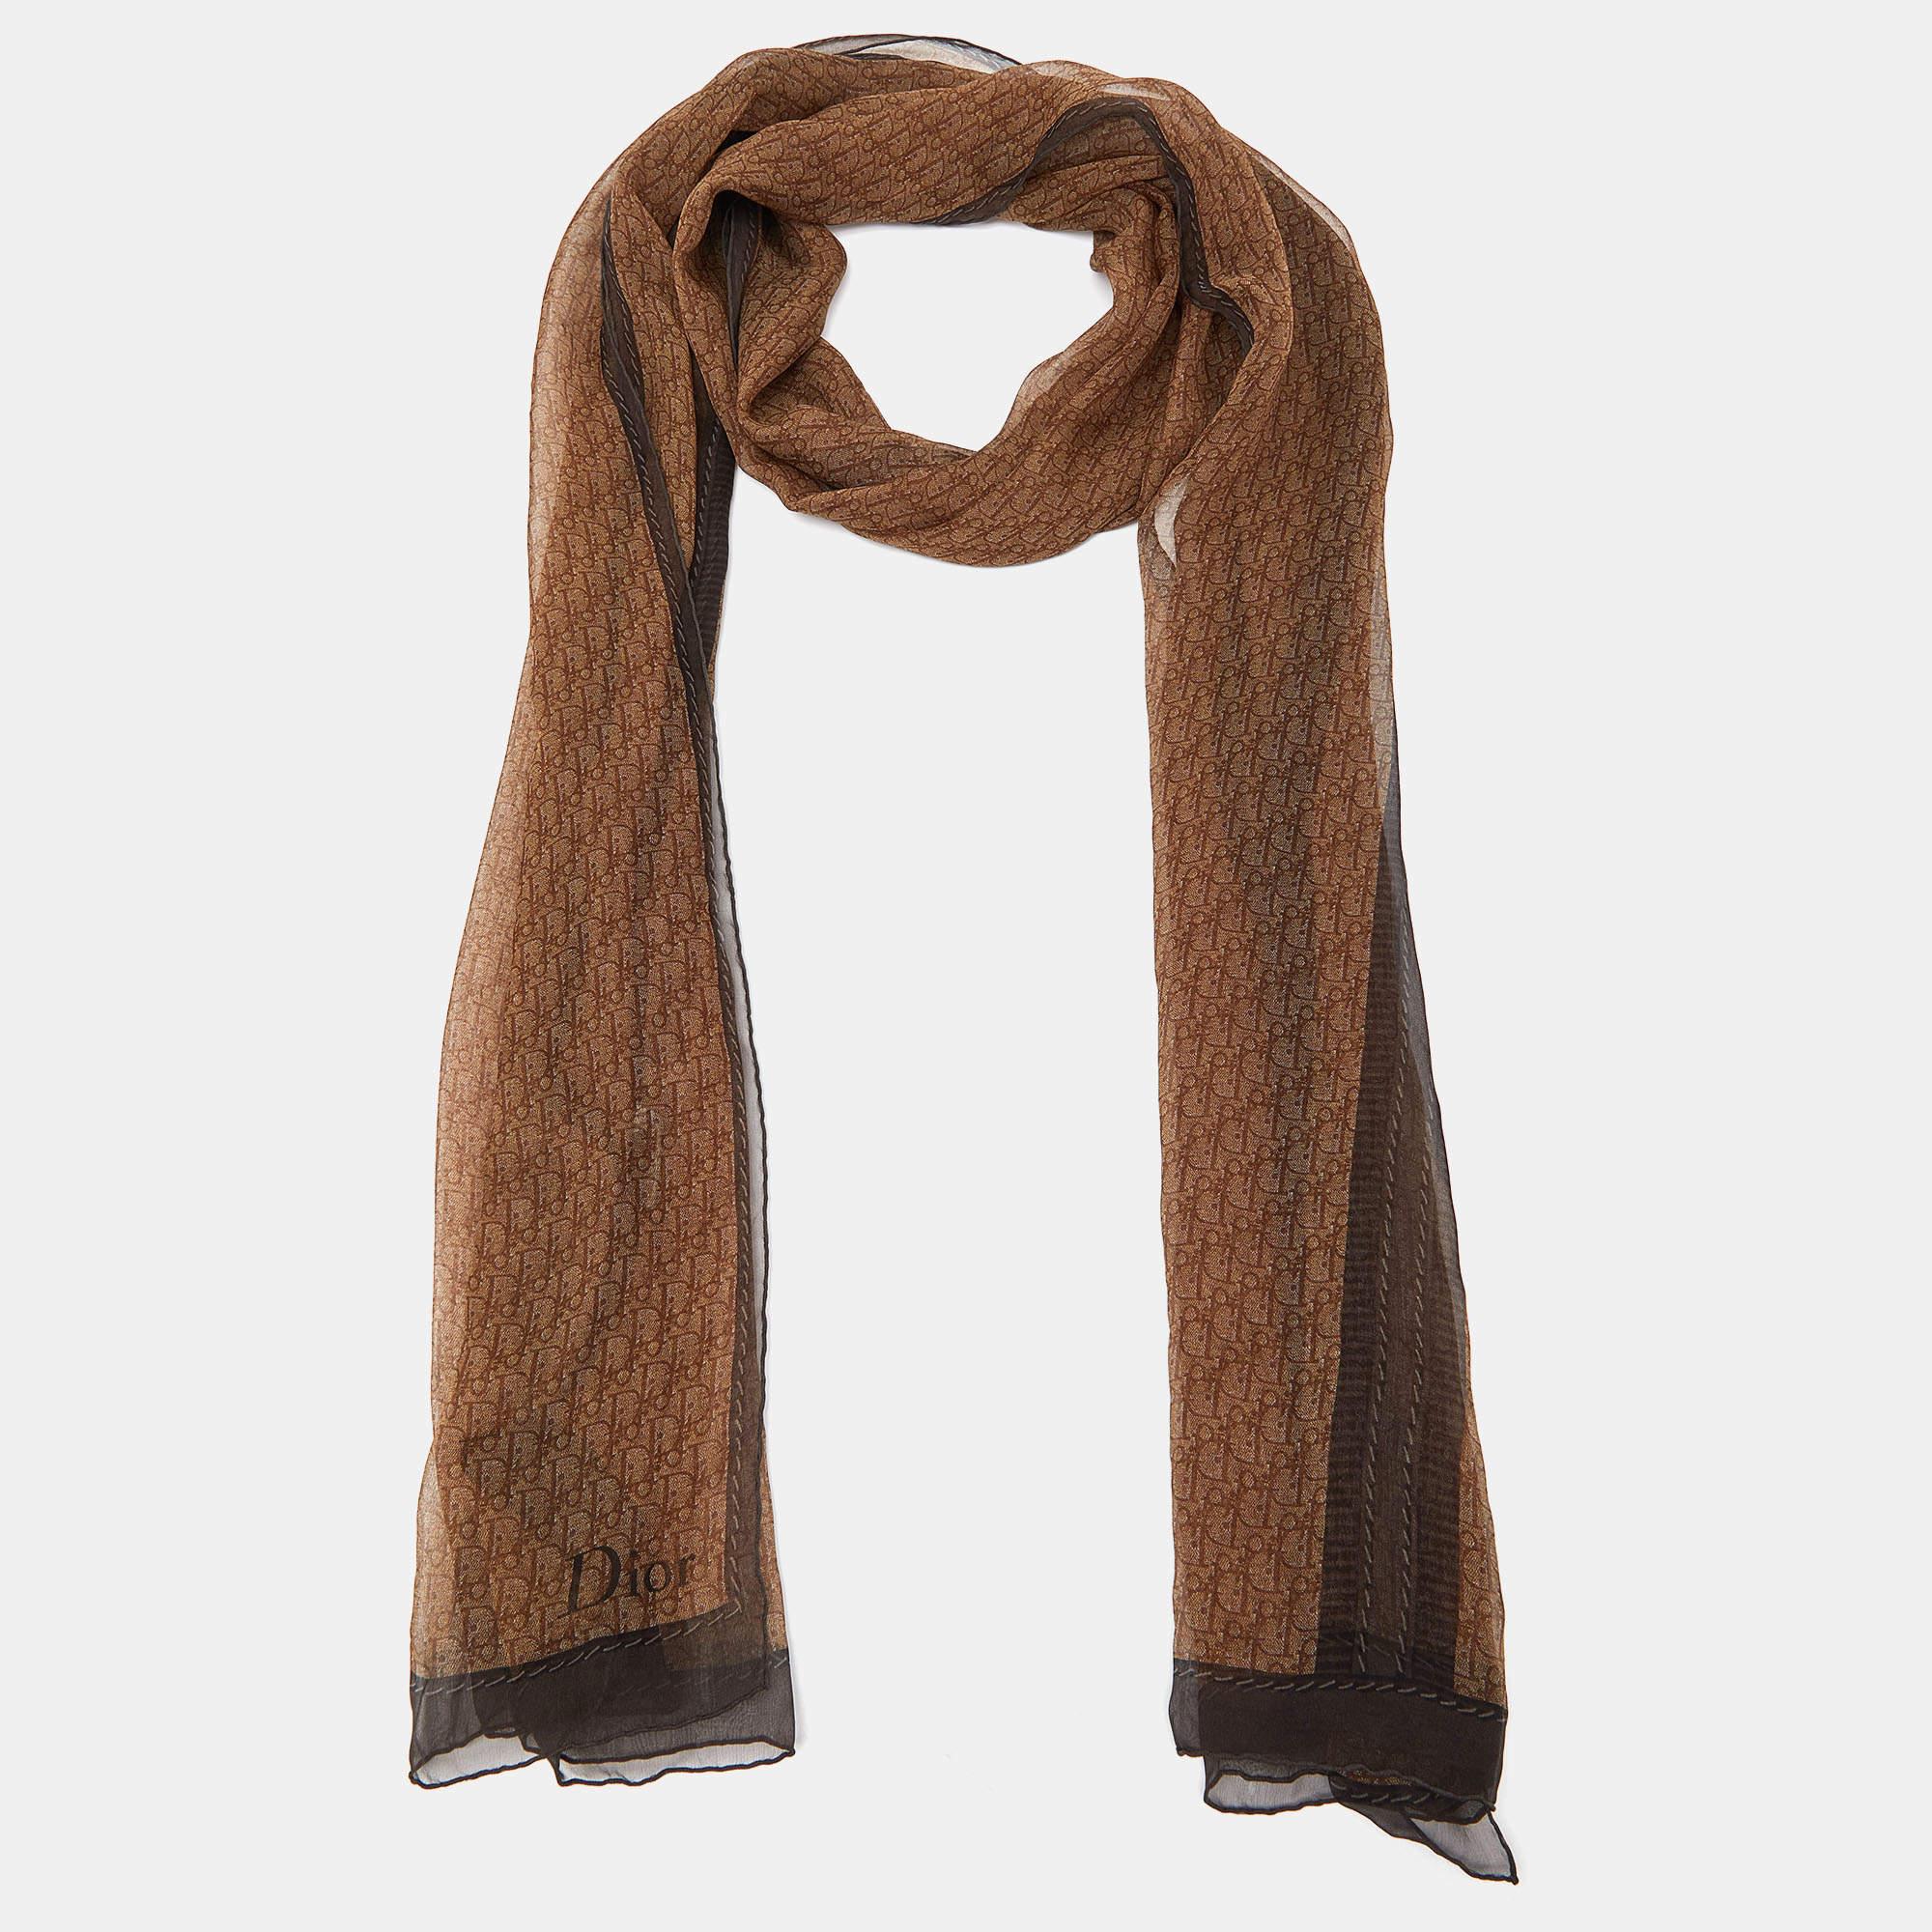 The Christian Dior stole is a luxurious fashion accessory. Crafted from high-quality silk, it features the iconic Dior Oblique logo pattern in a soft brown hue. This lightweight, generously sized stole is perfect for adding elegance and